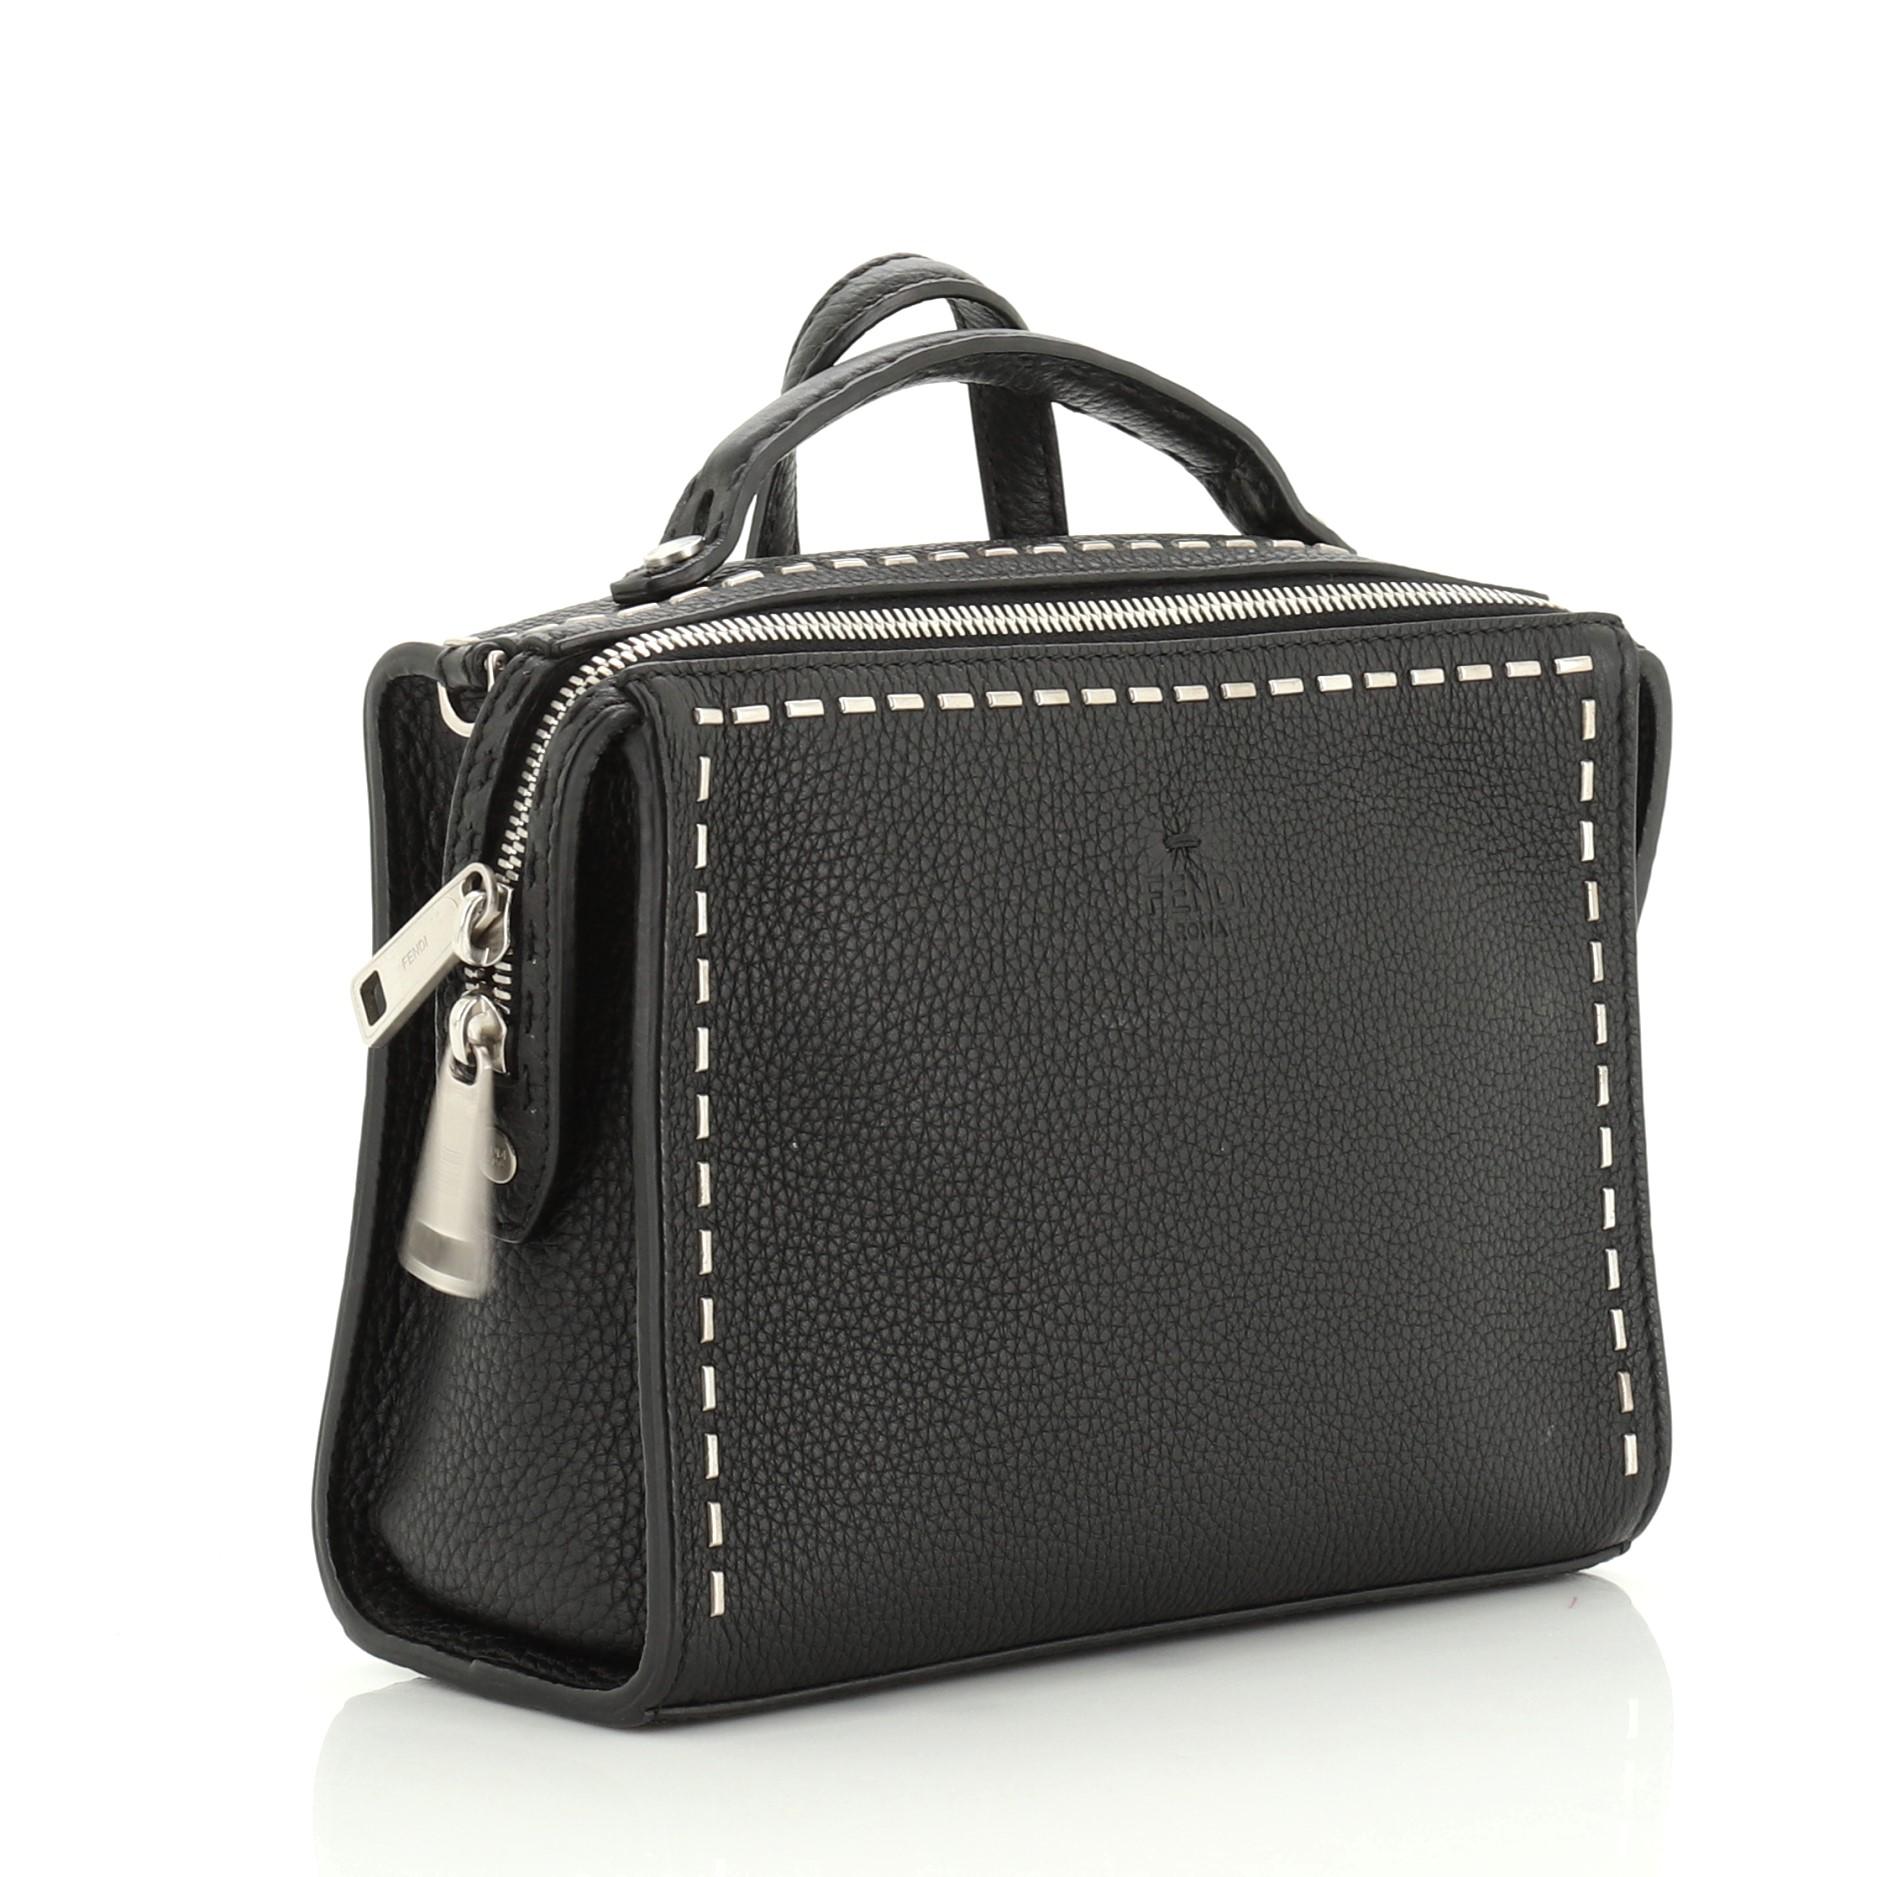 This Fendi Selleria Messenger Bag Studded Leather Mini, crafted in black leather, features a leather top handle, and matte silver-tone hardware. Its zip closure opens to a black fabric interior. 

Estimated Retail Price: $2,100
Condition: Damaged.